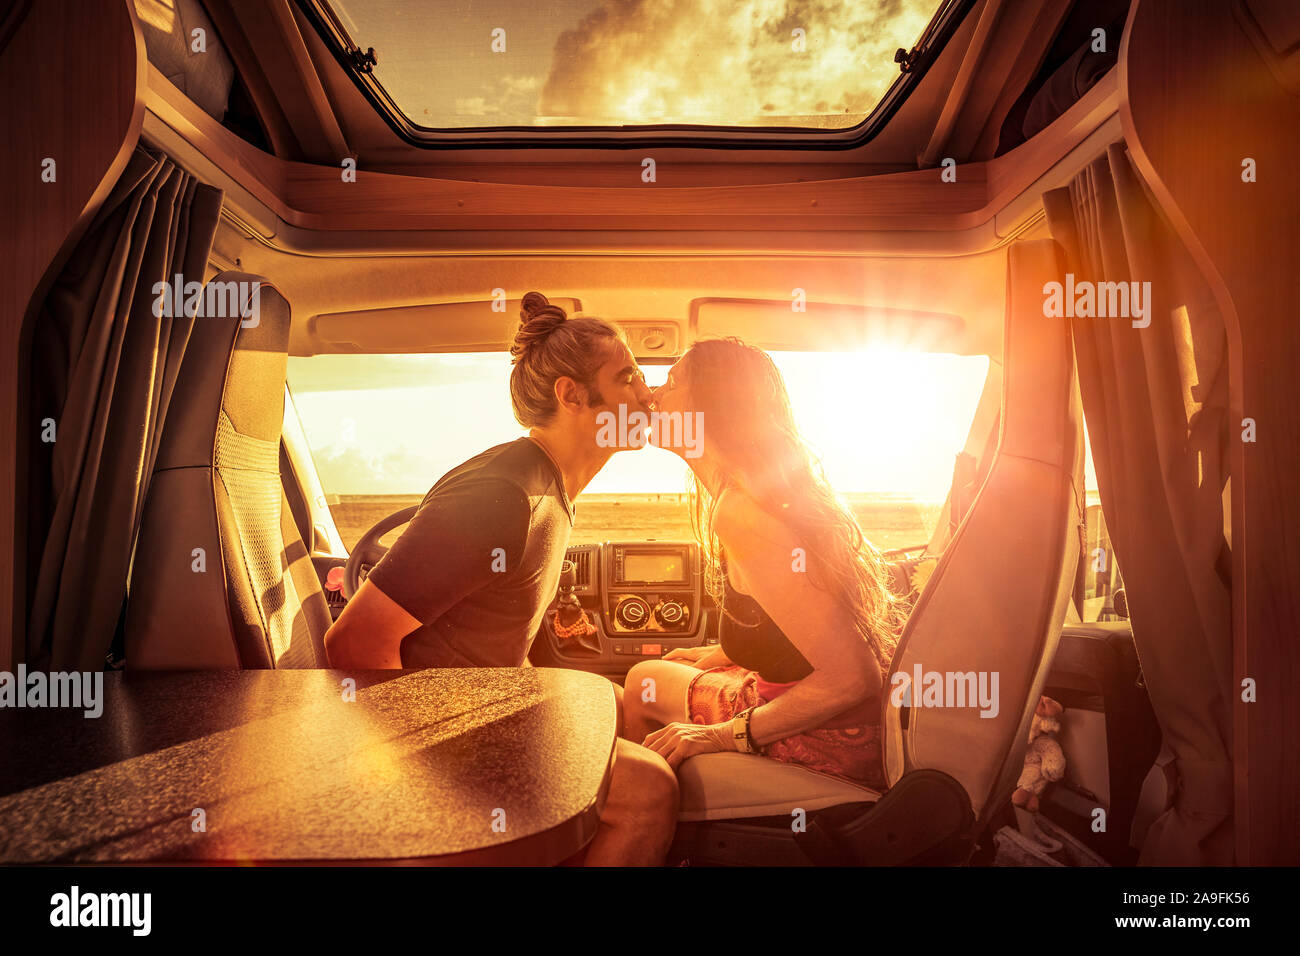 Couple in camper at sunset in romantic mood Stock Photo